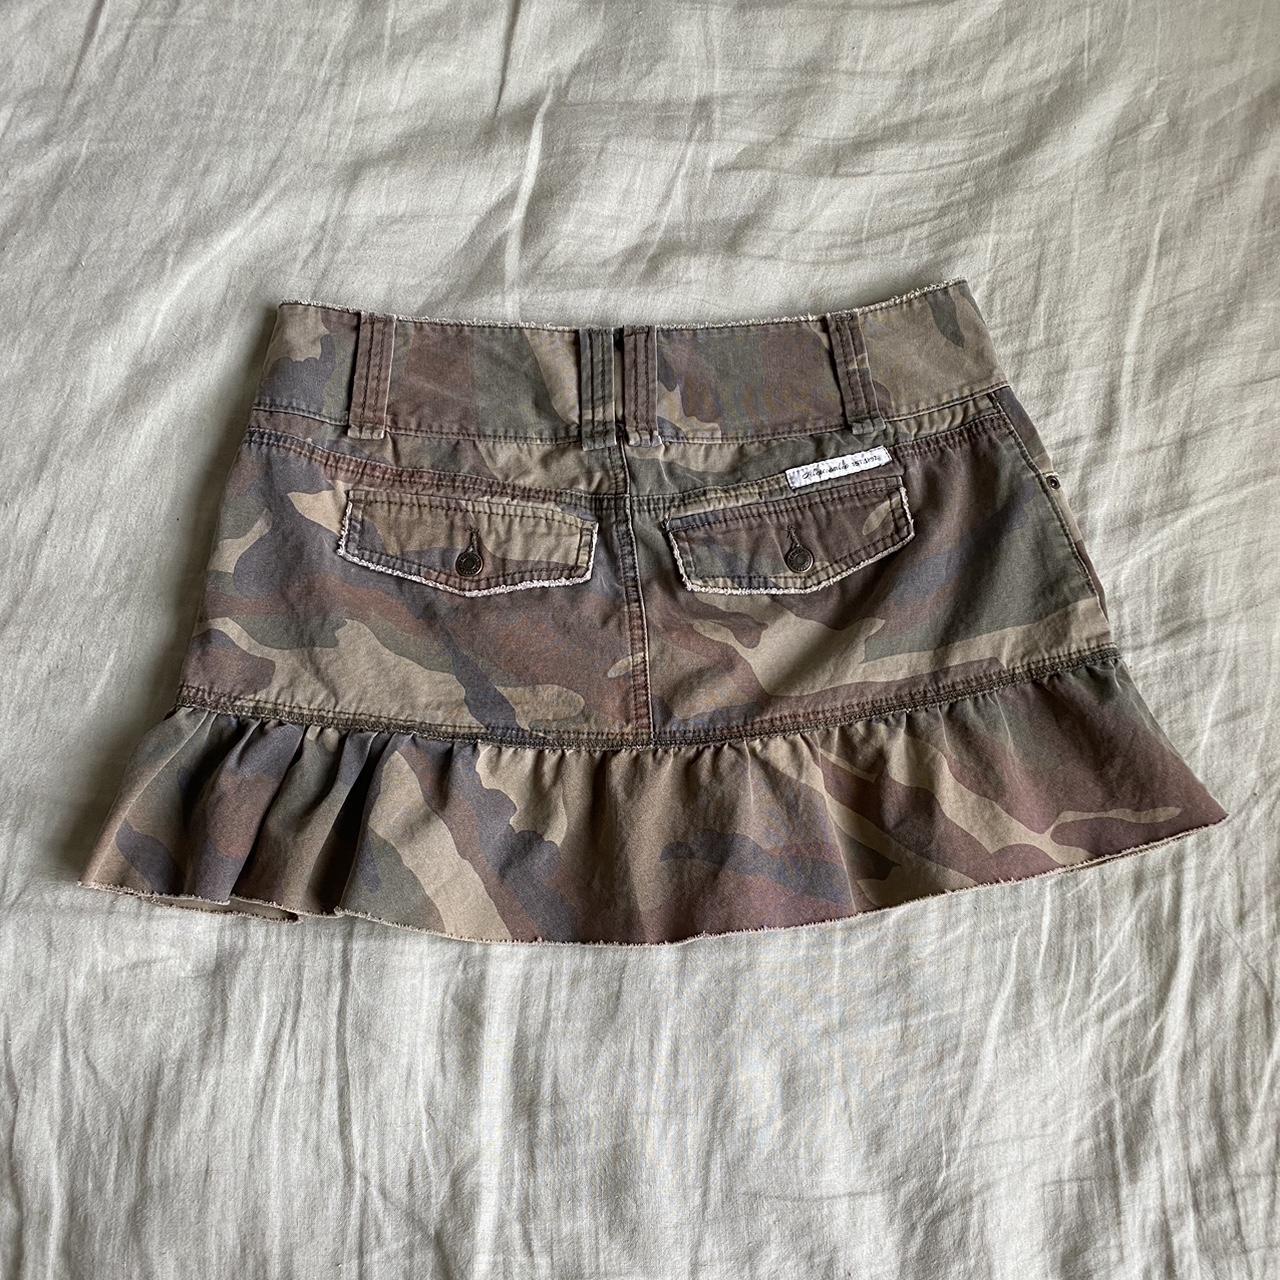 Abercrombie & Fitch Women's Green and Khaki Skirt (3)